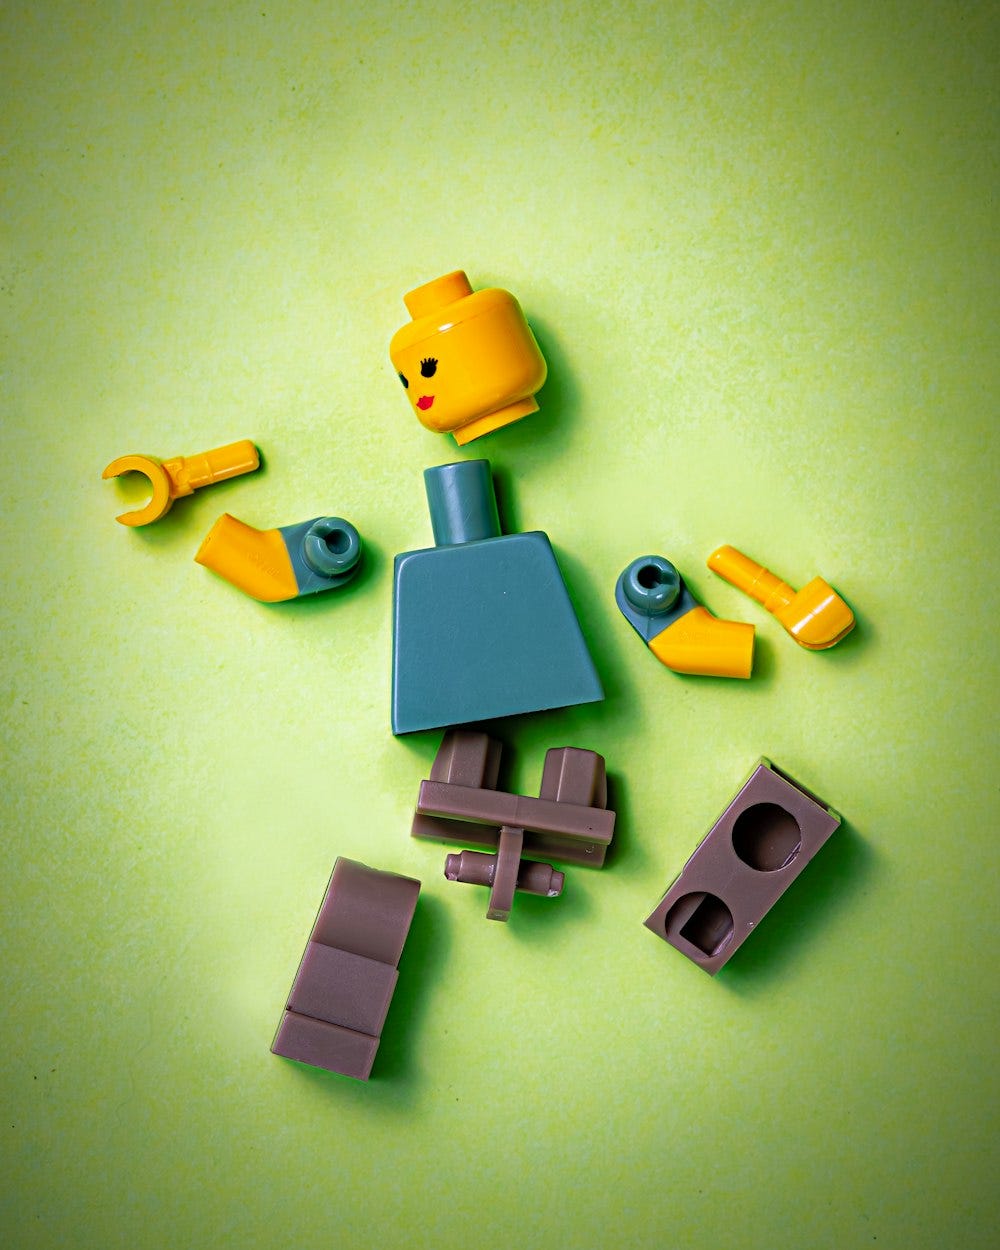 Dismantled wooden toy